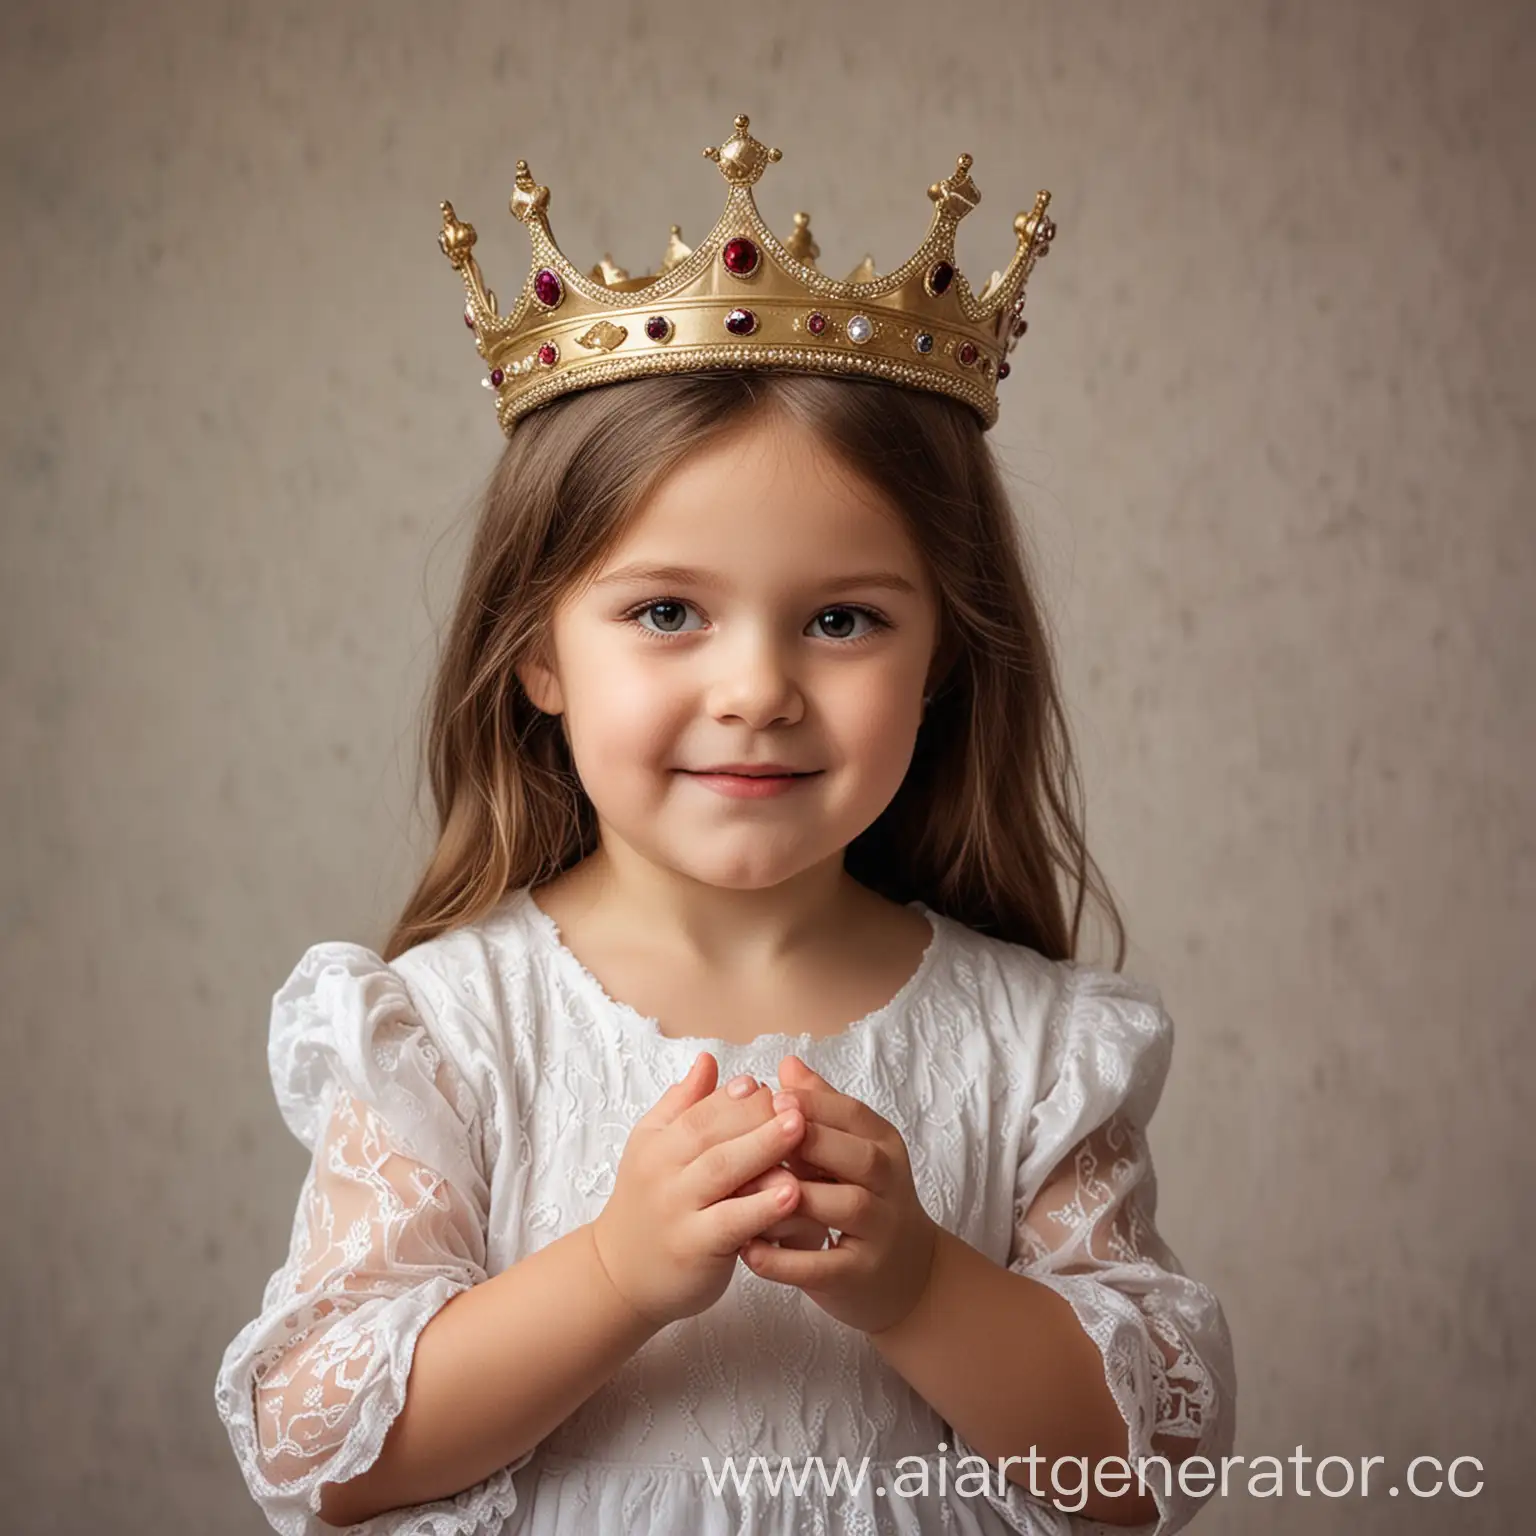 Young-Girl-Holding-Crown-Dreamy-Portrait-of-a-Child-with-Royalty-Symbol